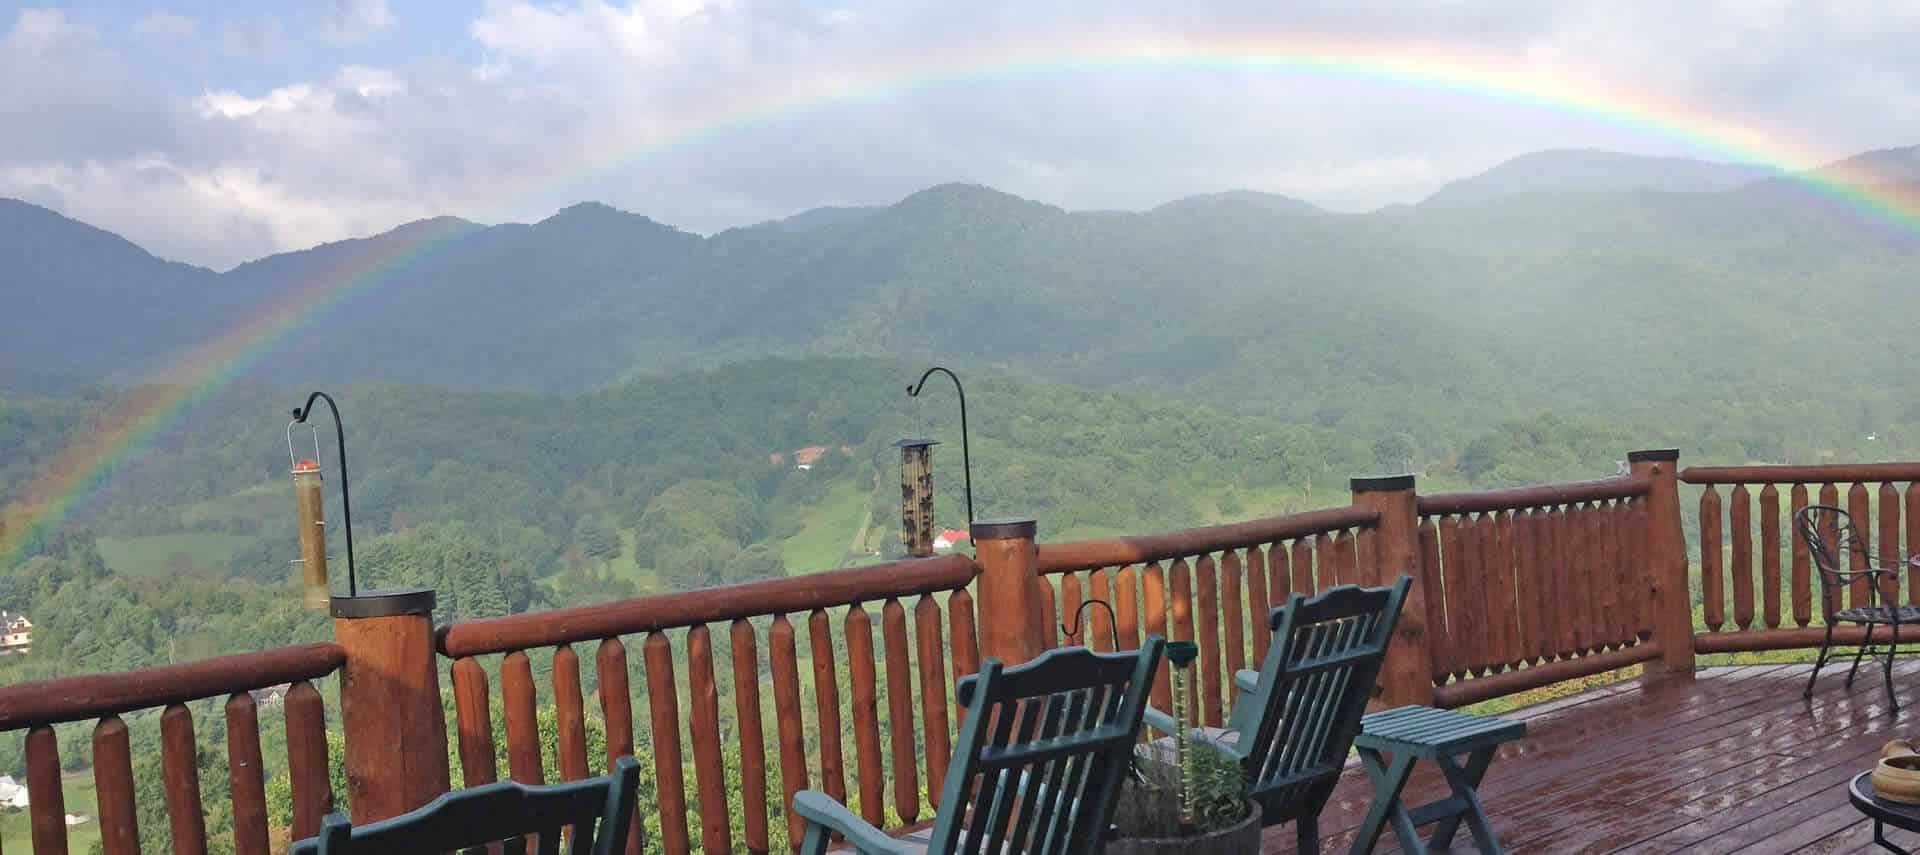 Beautiful rainbow seen through the mist from a wooden deck with green patio chairs. 